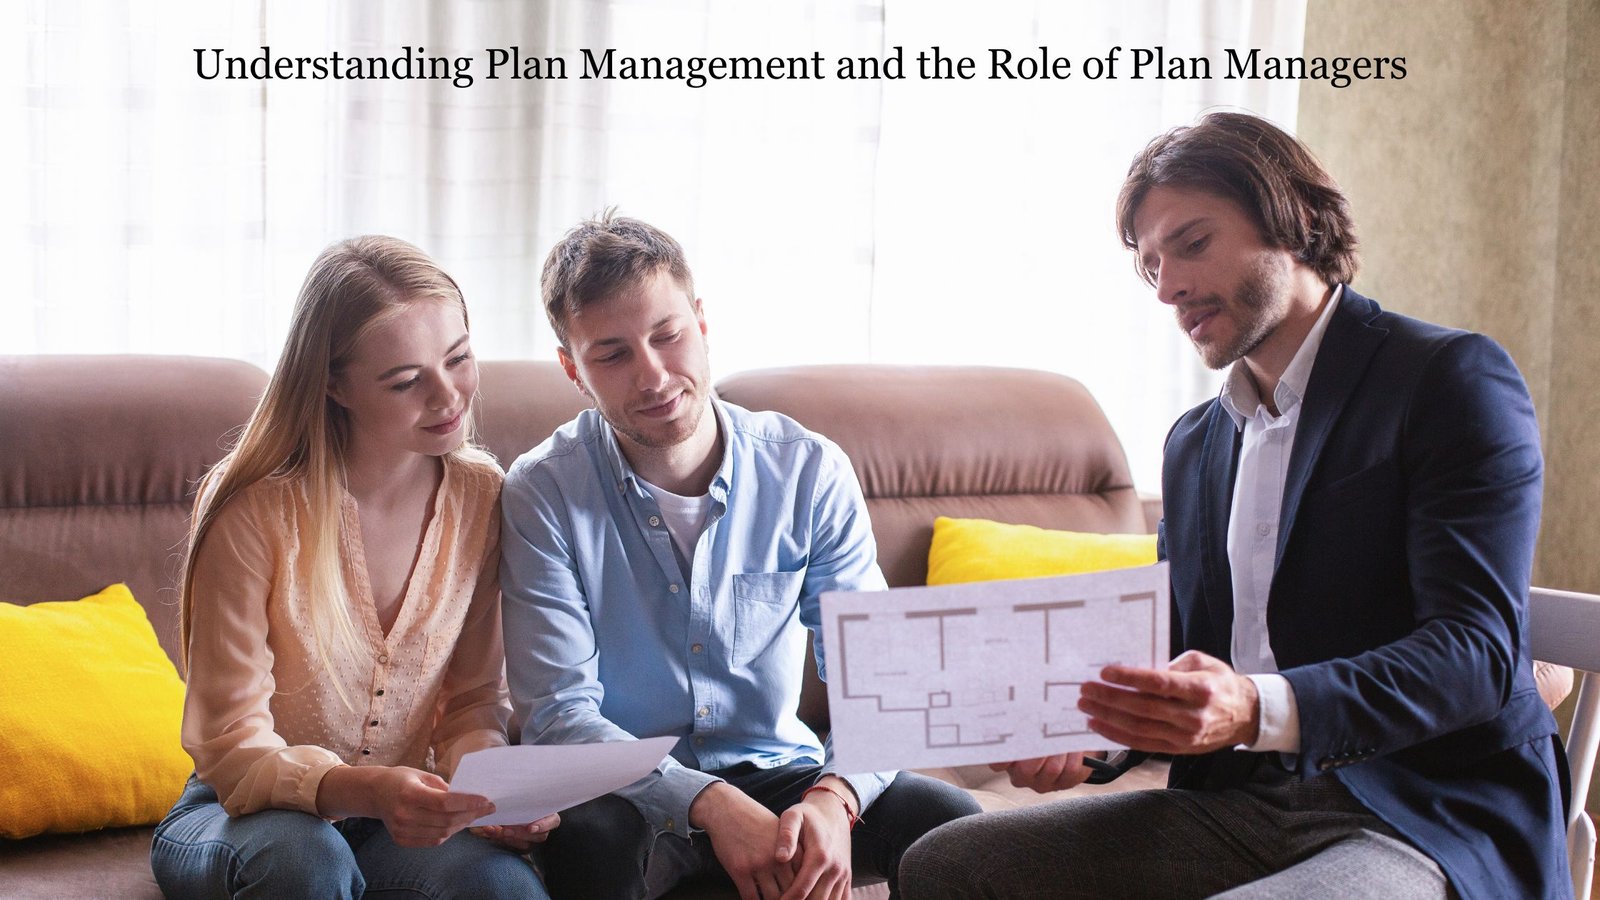 Understanding Plan Management and the Role of Plan Managers